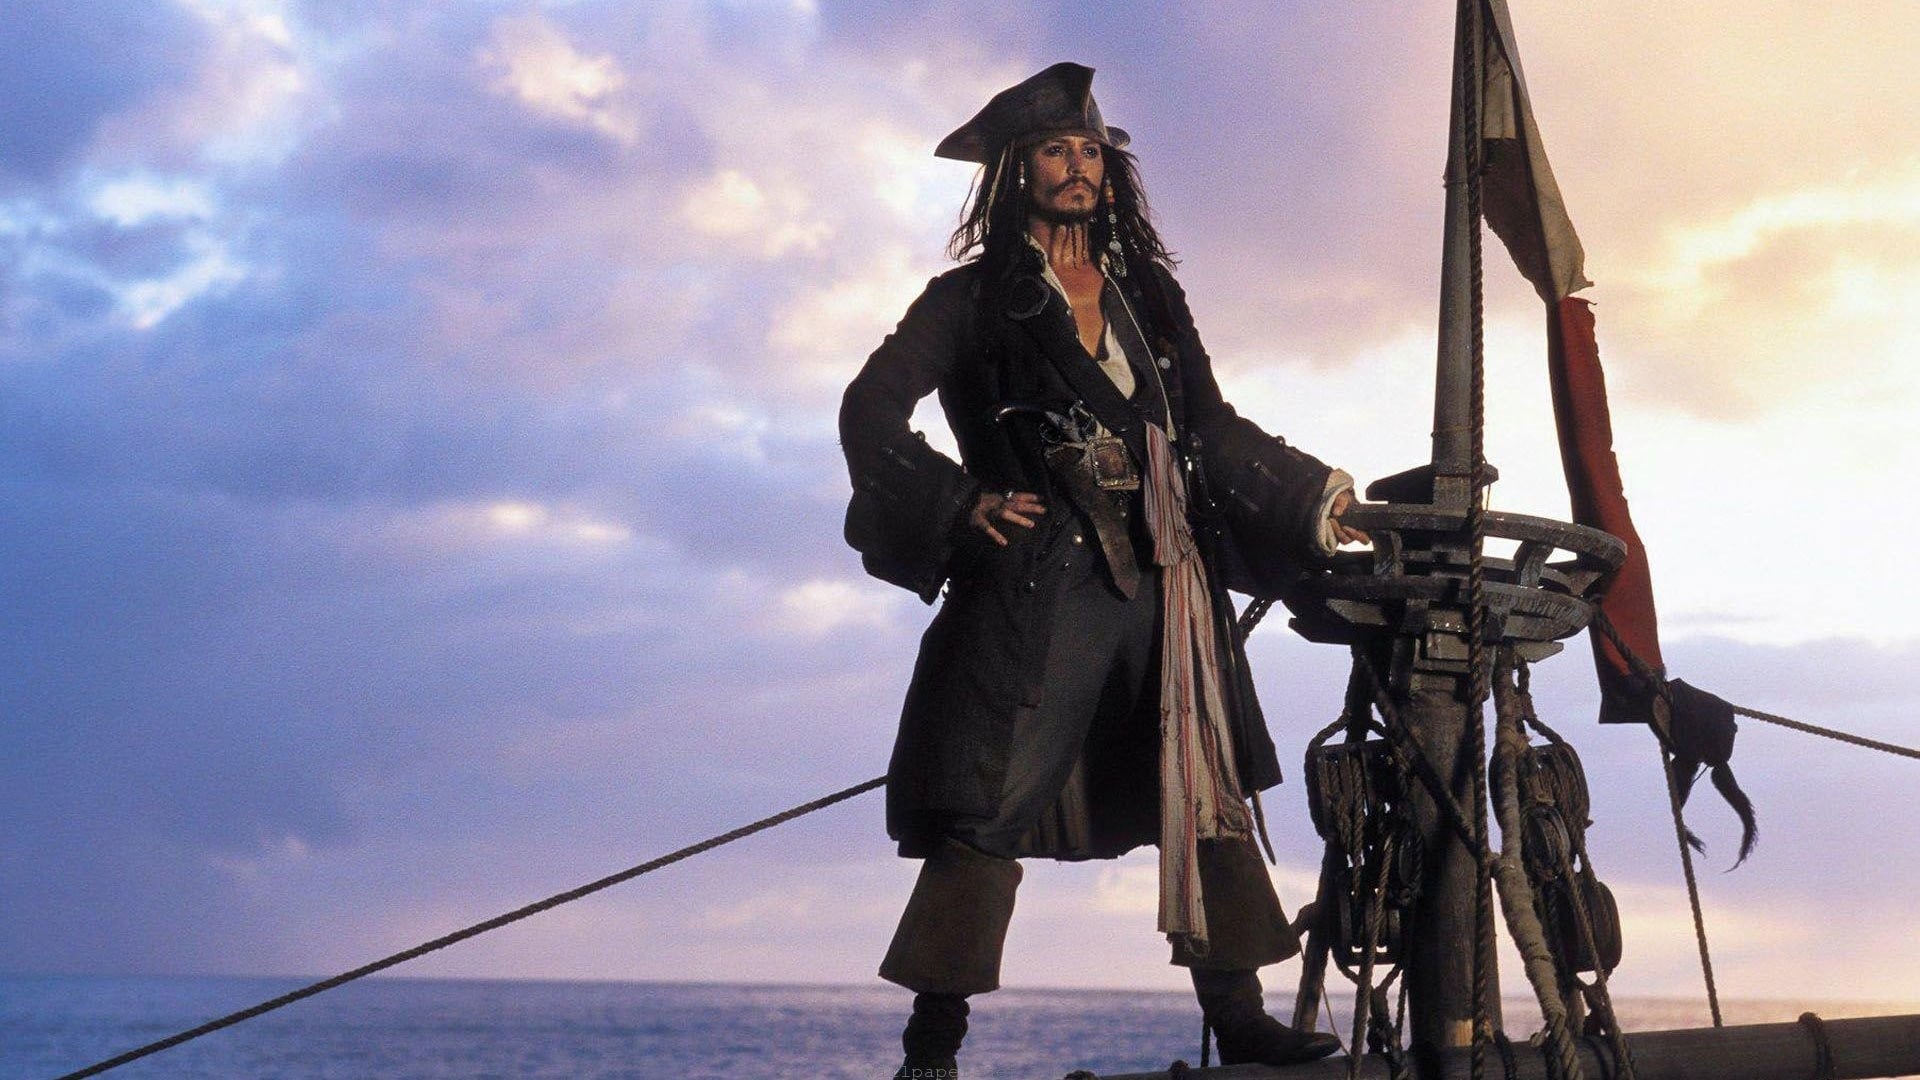 Disney’s Pirates of the Caribbean: The Curse of the Black Pearl Sails to 4K Ultra HD January 2